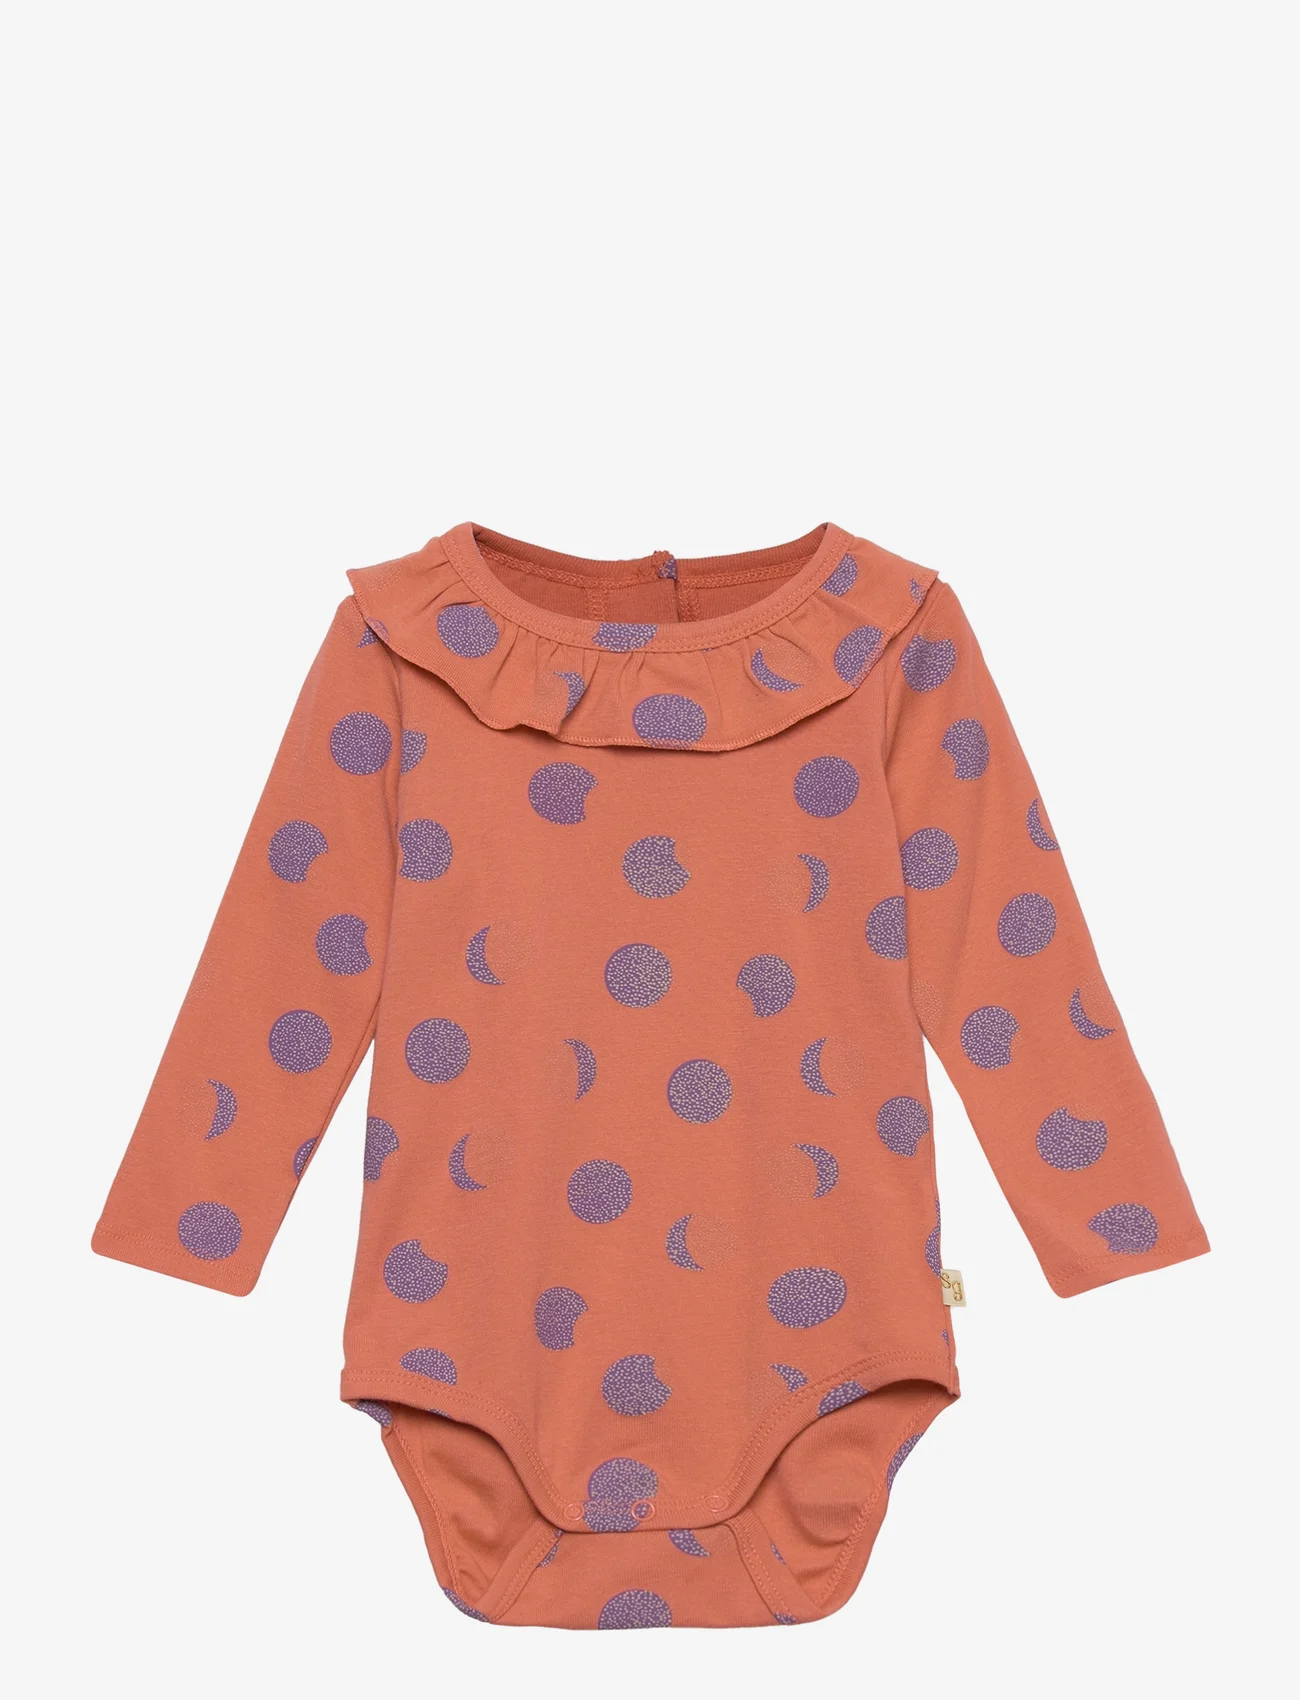 Soft Gallery - SGBize Dotty Moon LS body - long-sleeved bodies - crabapple - 0